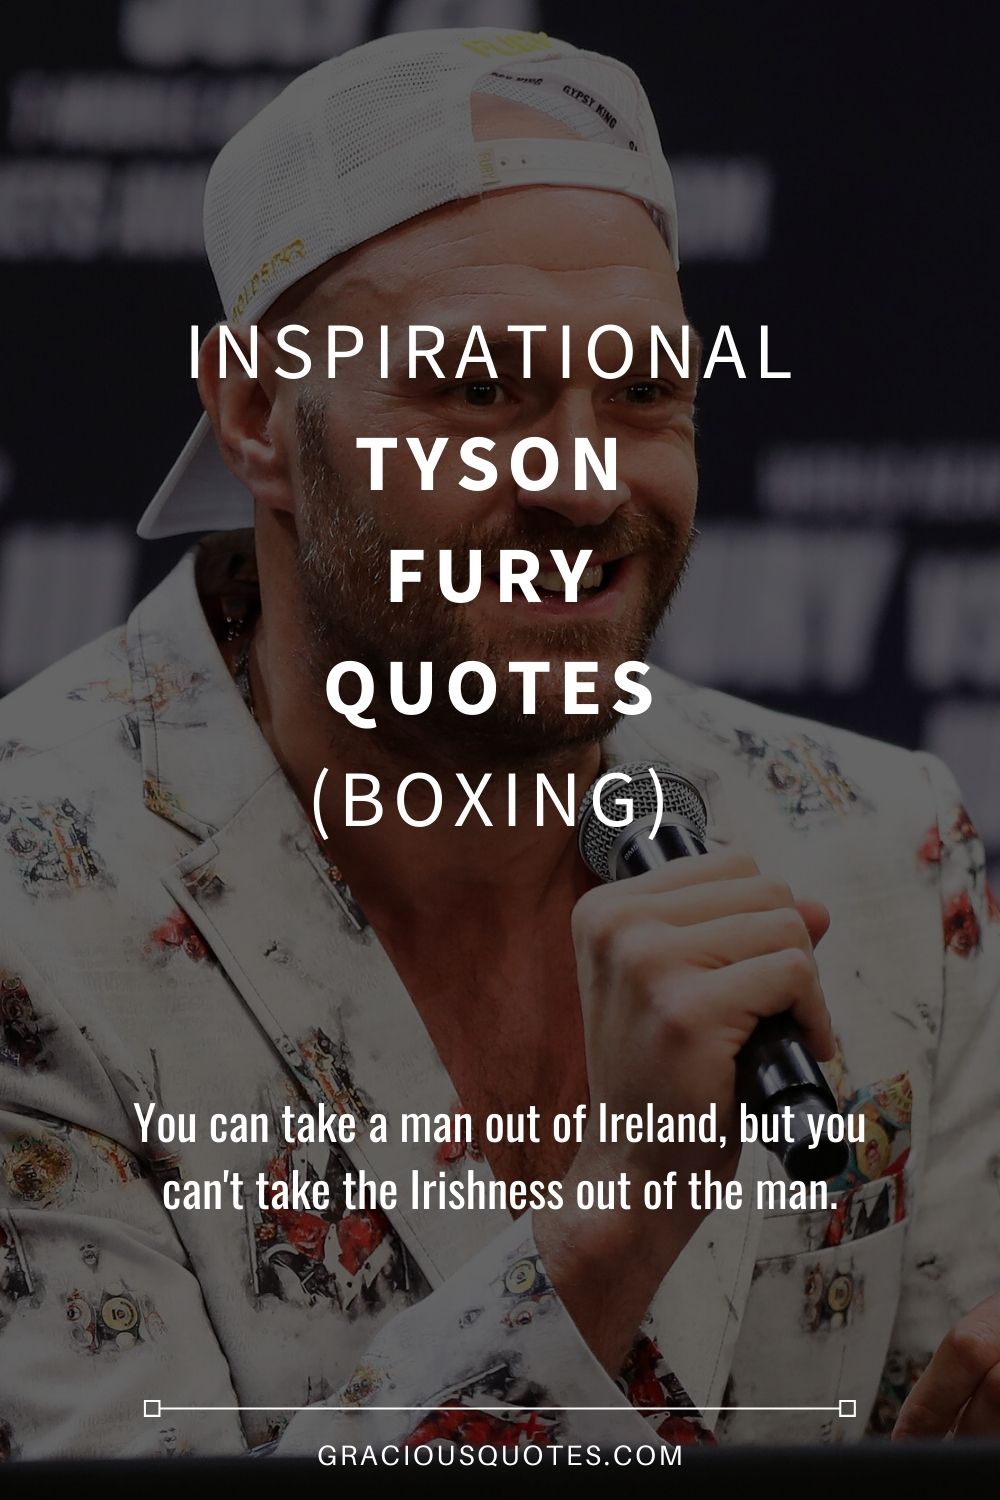 Inspirational Tyson Fury Quotes (BOXING) - Gracious Quotes